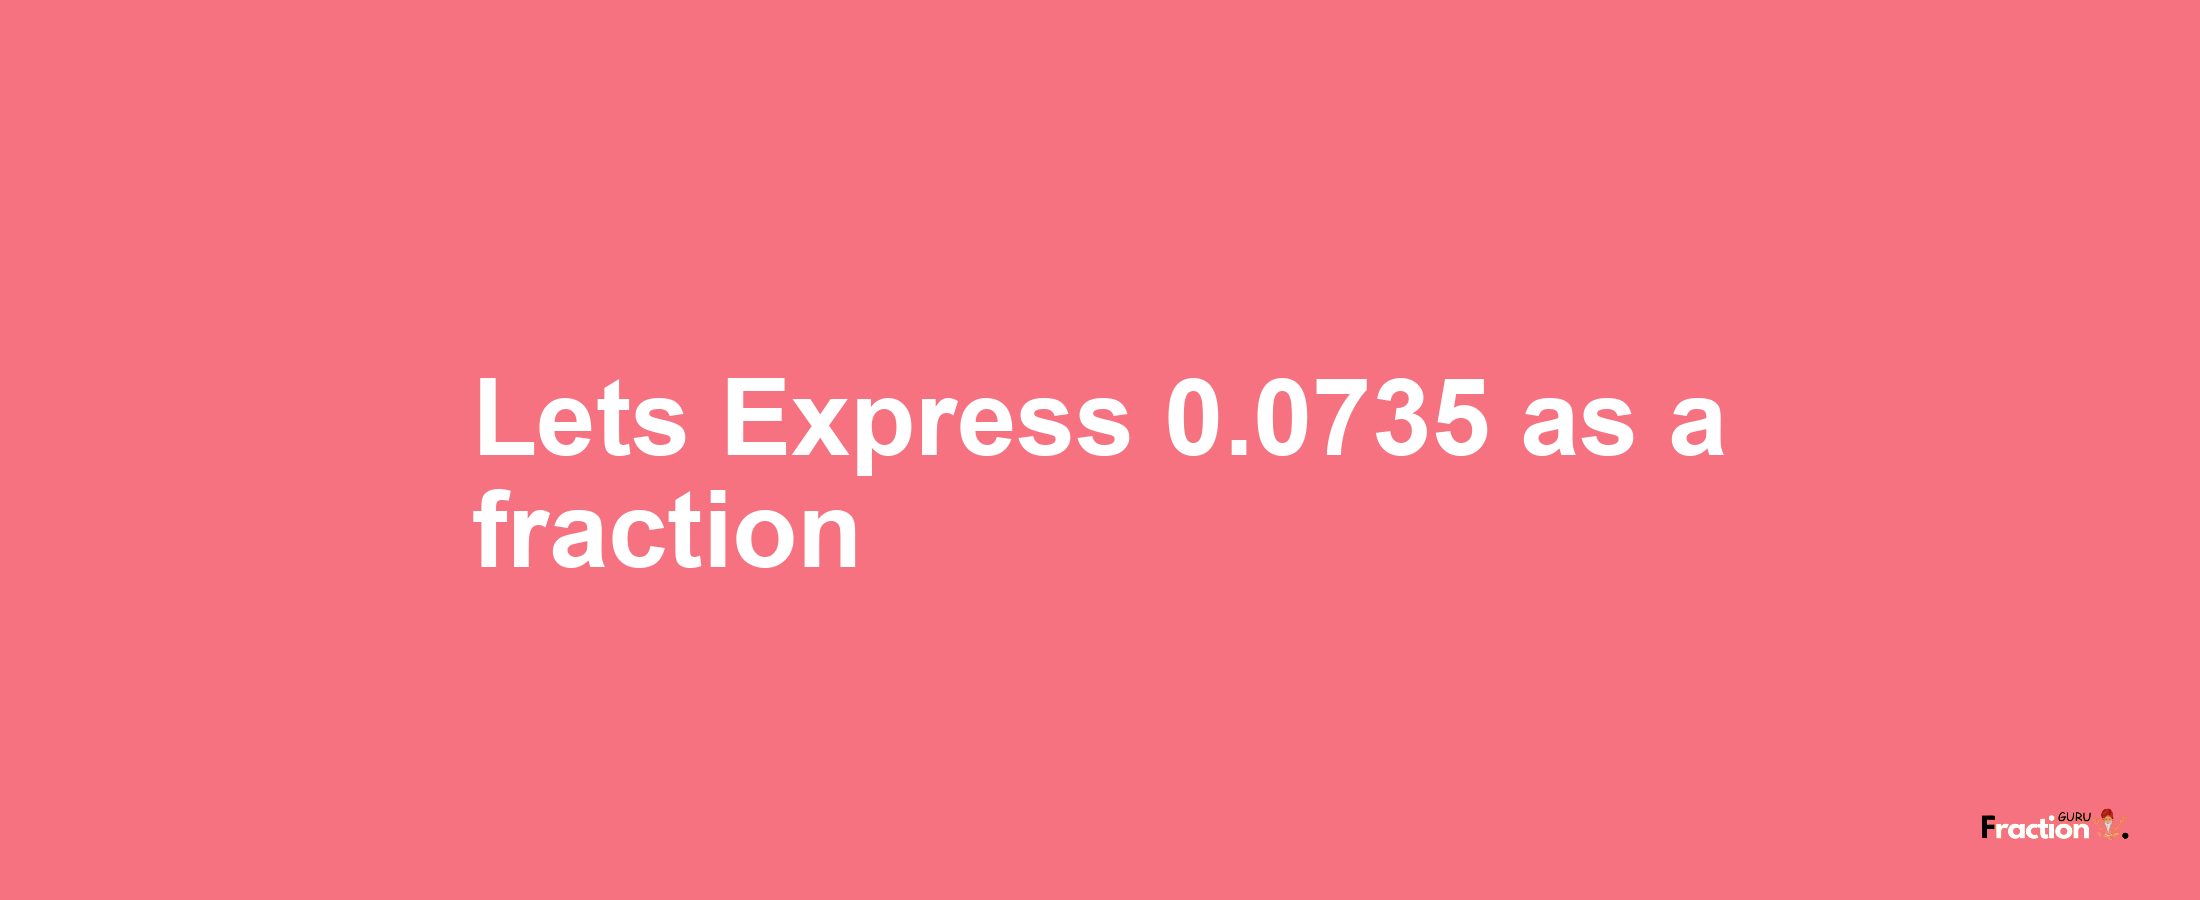 Lets Express 0.0735 as afraction